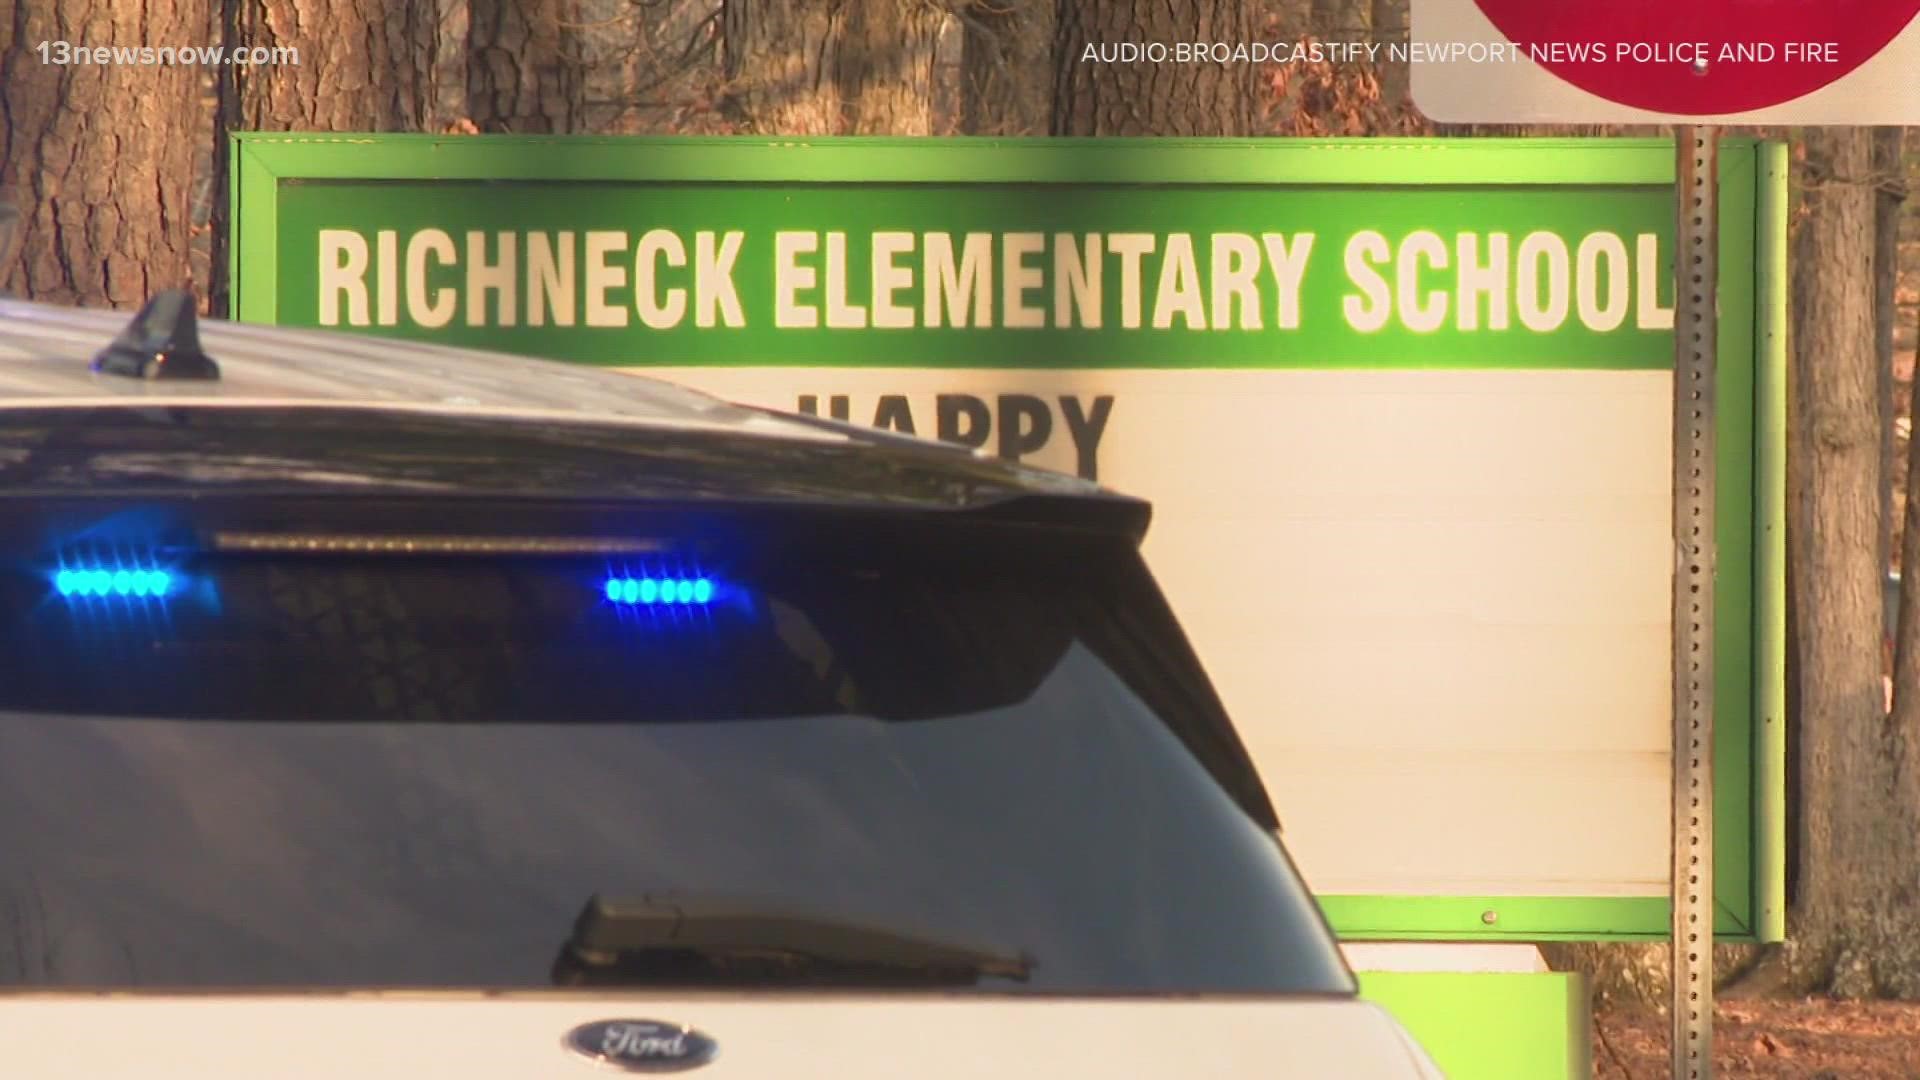 Newport News police confirmed the shooter was a 6-year-old student.